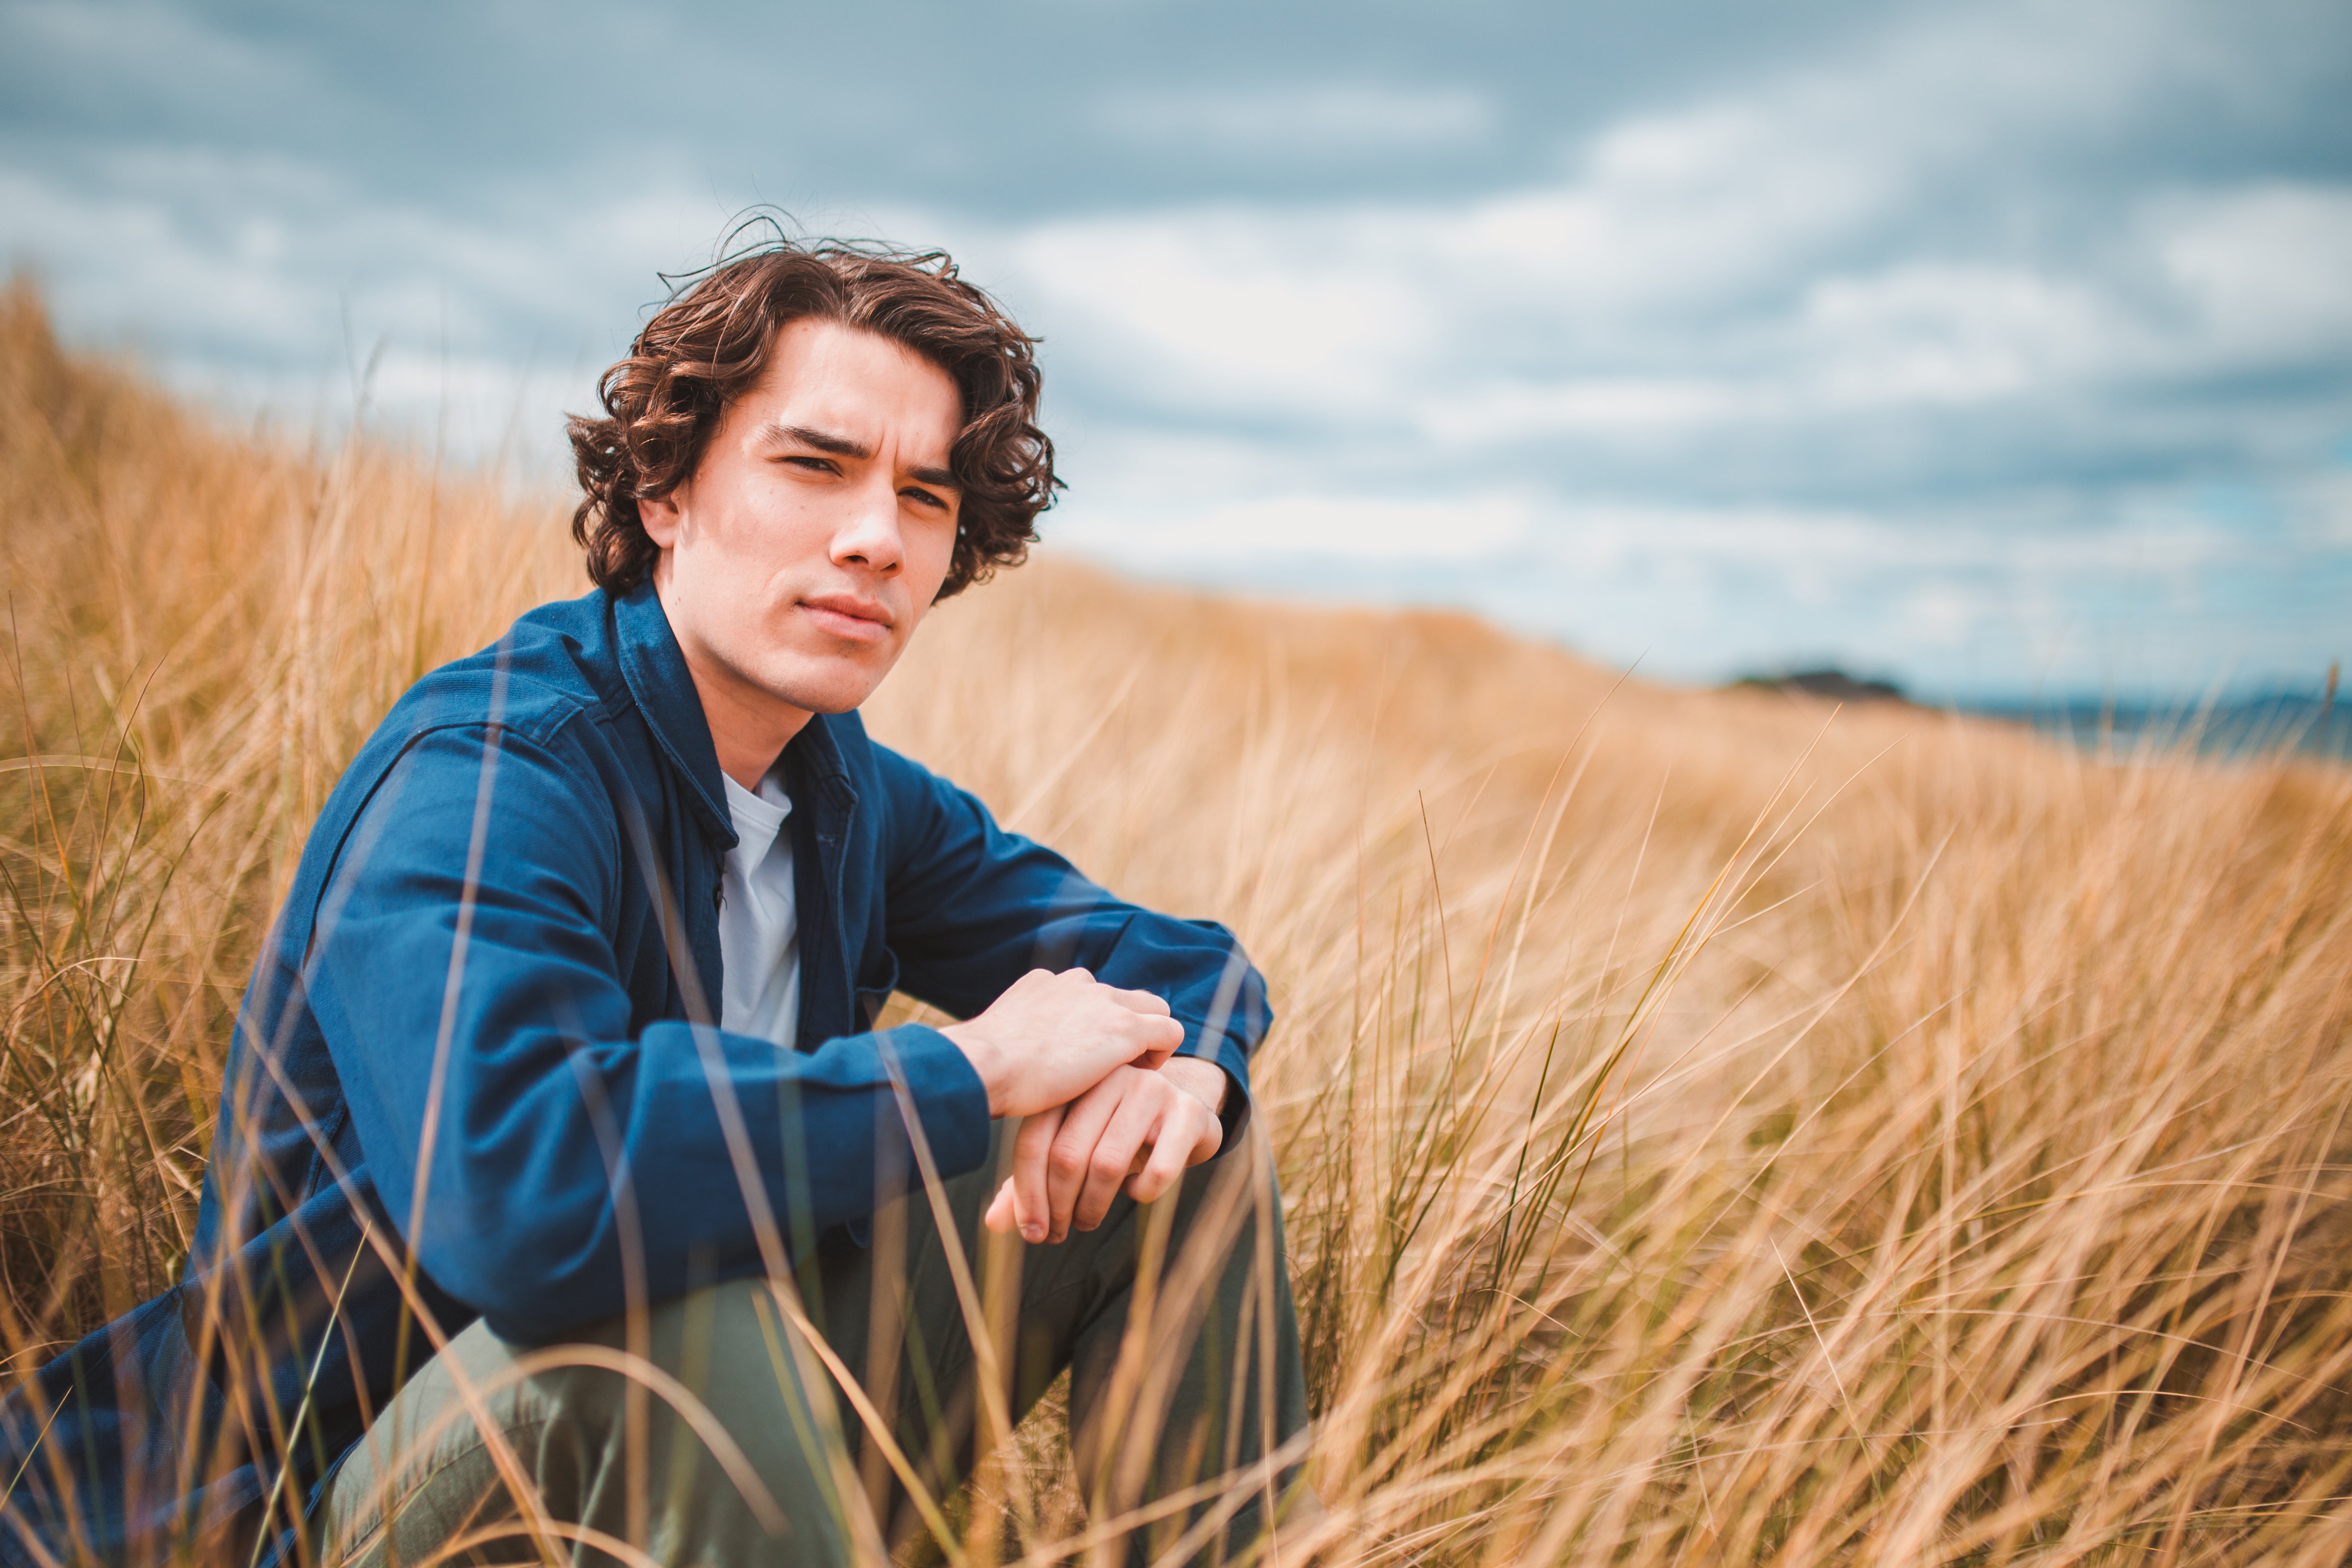 A male with short curly hair is sitting in some dune grass looking out towards the camera with a cloudy sky behind him. He has a neutral expression and his hair is flowing in the wind.